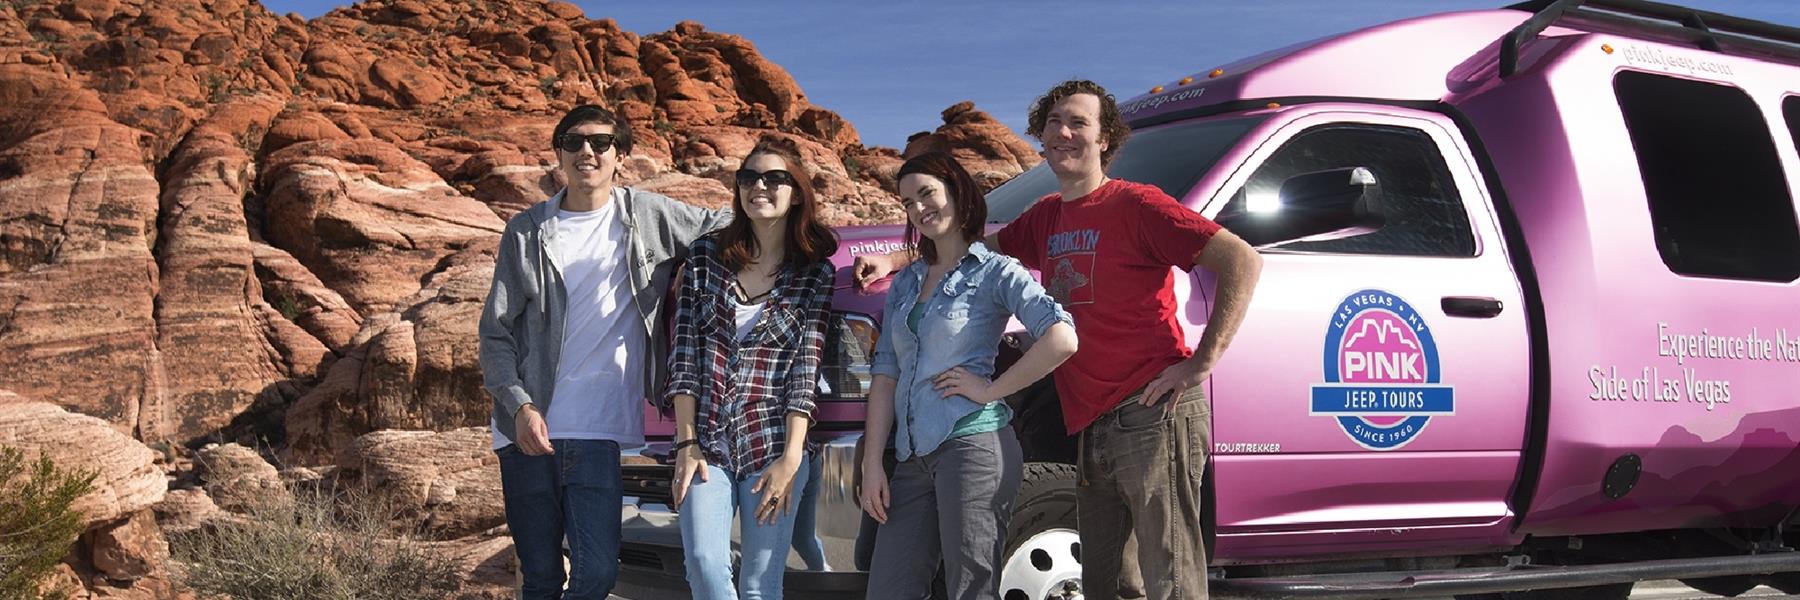 Red Rock Canyon Classic - Pink Jeep Tour in Las Vegas, Nevada